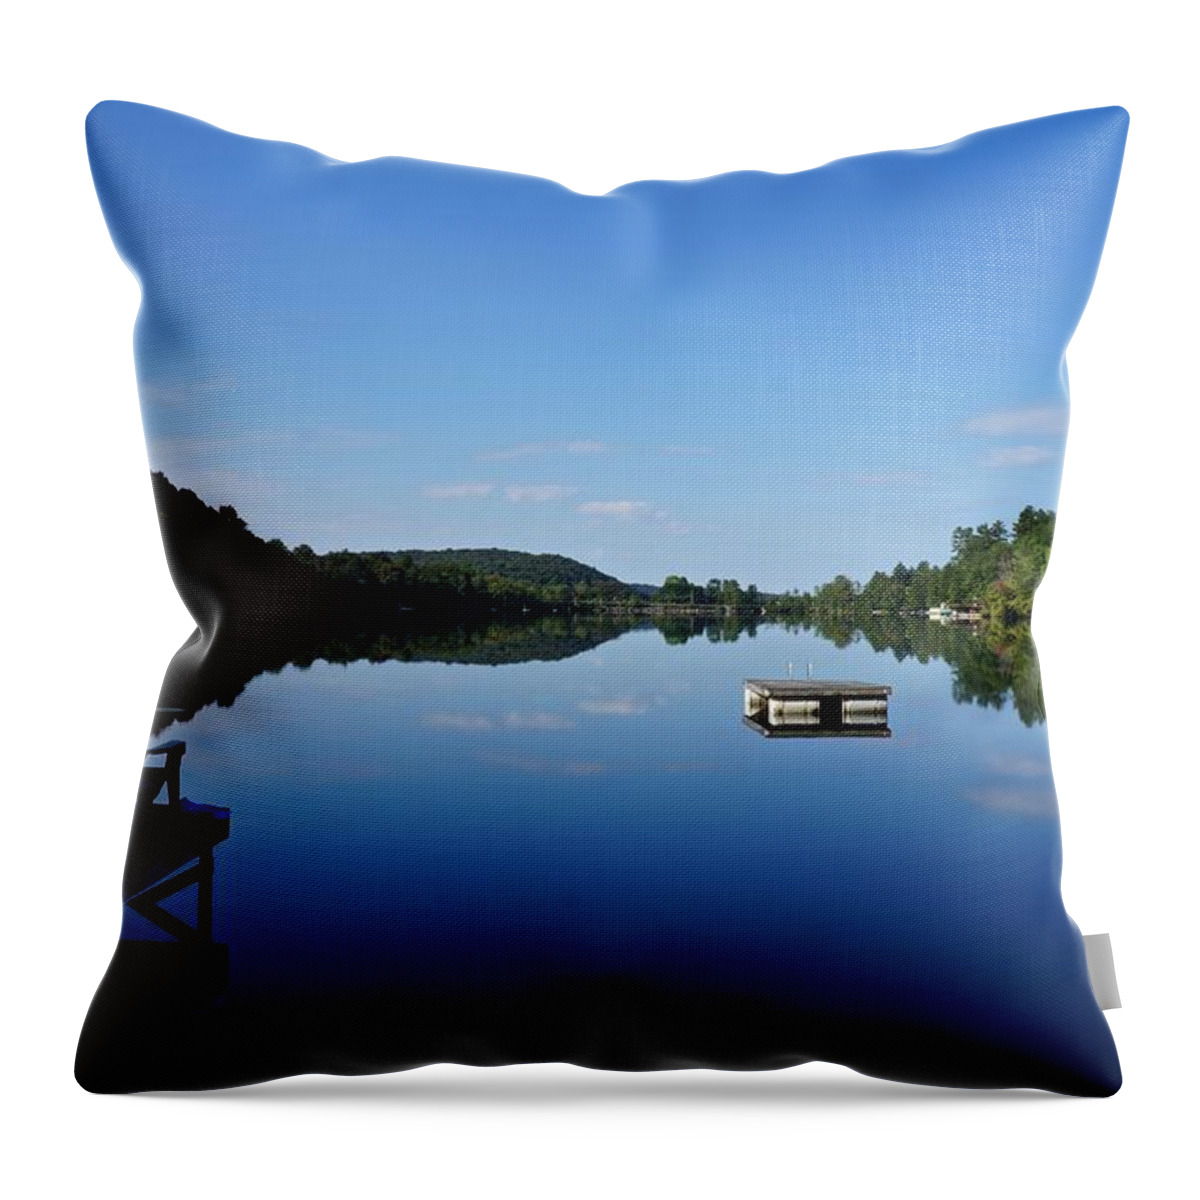 Lake Throw Pillow featuring the photograph Daytime Lake by Kathy Chism